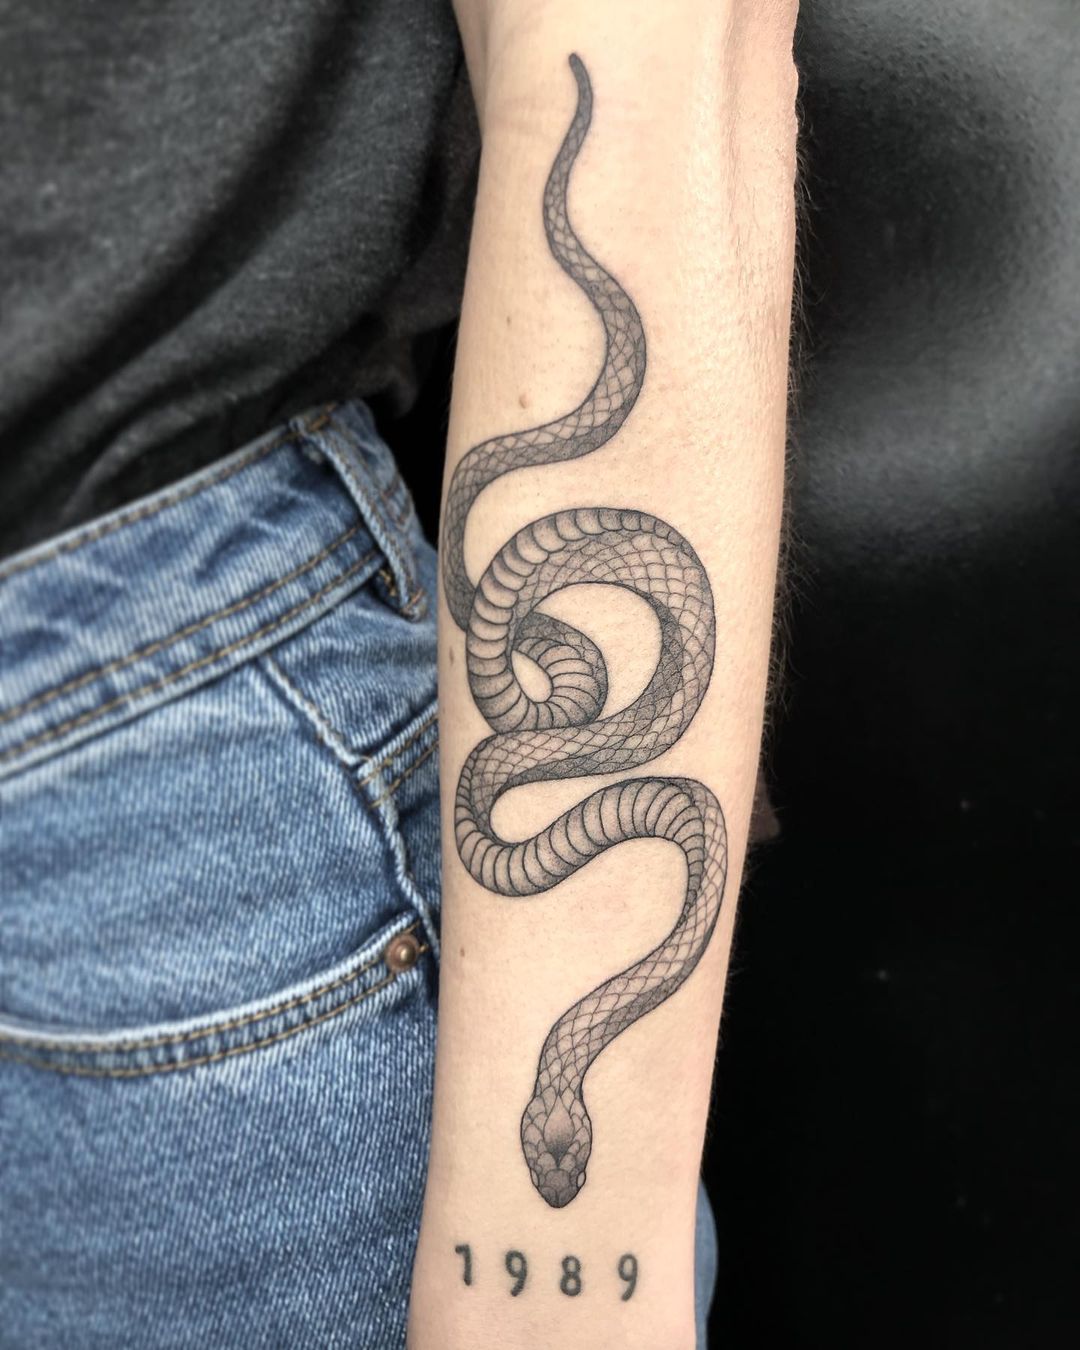 60 Amazing Snake Tattoo Designs and Ideas for Men and Women